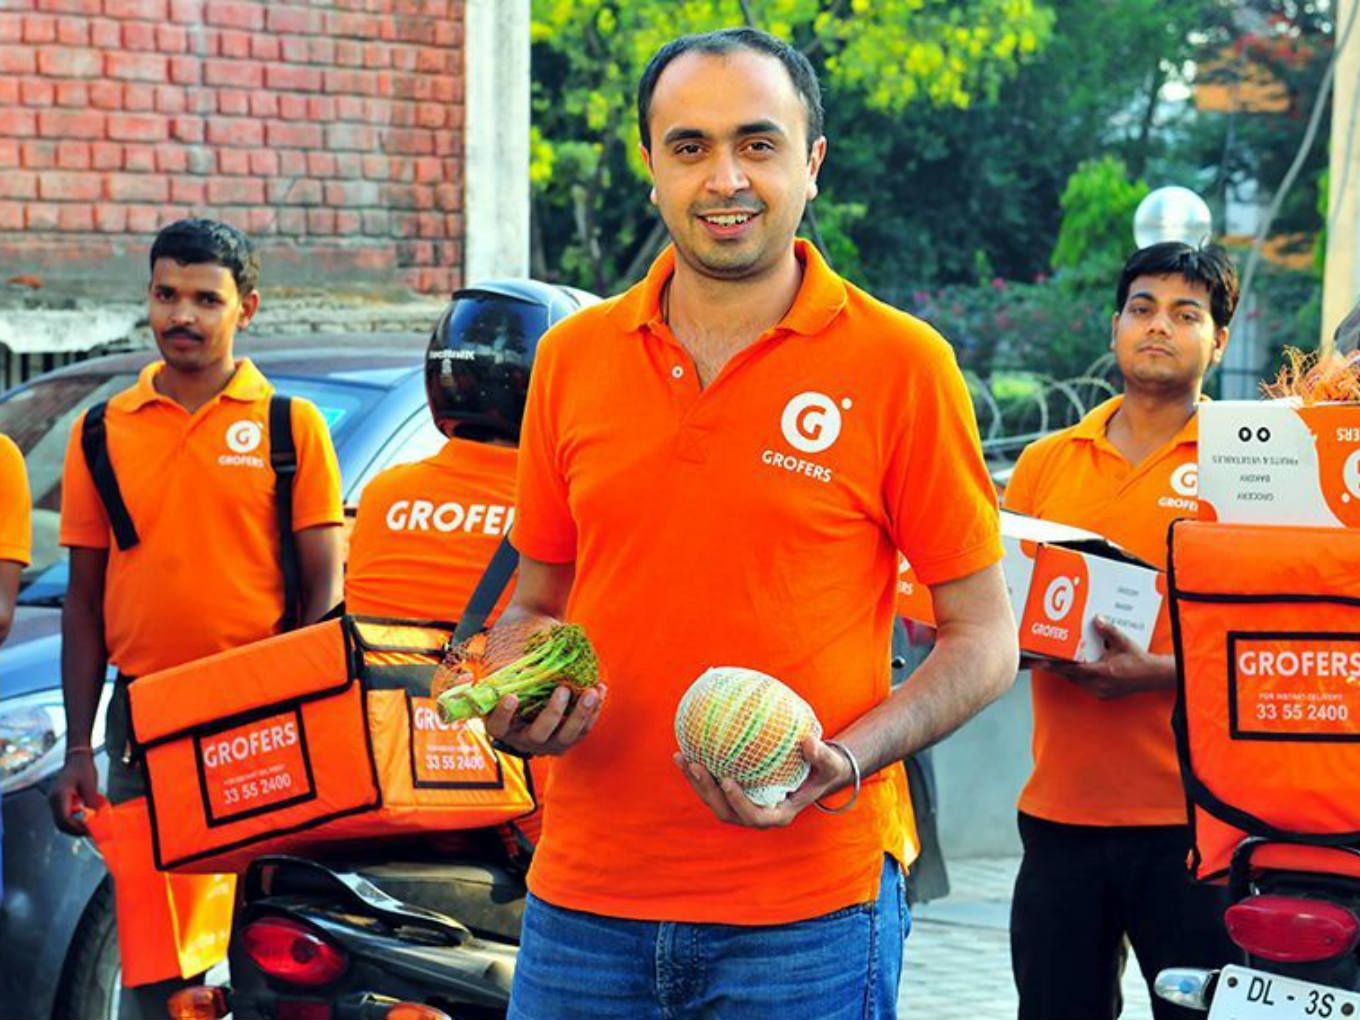 Grofers Plans $15 Mn Investment To Meet Surging Demand